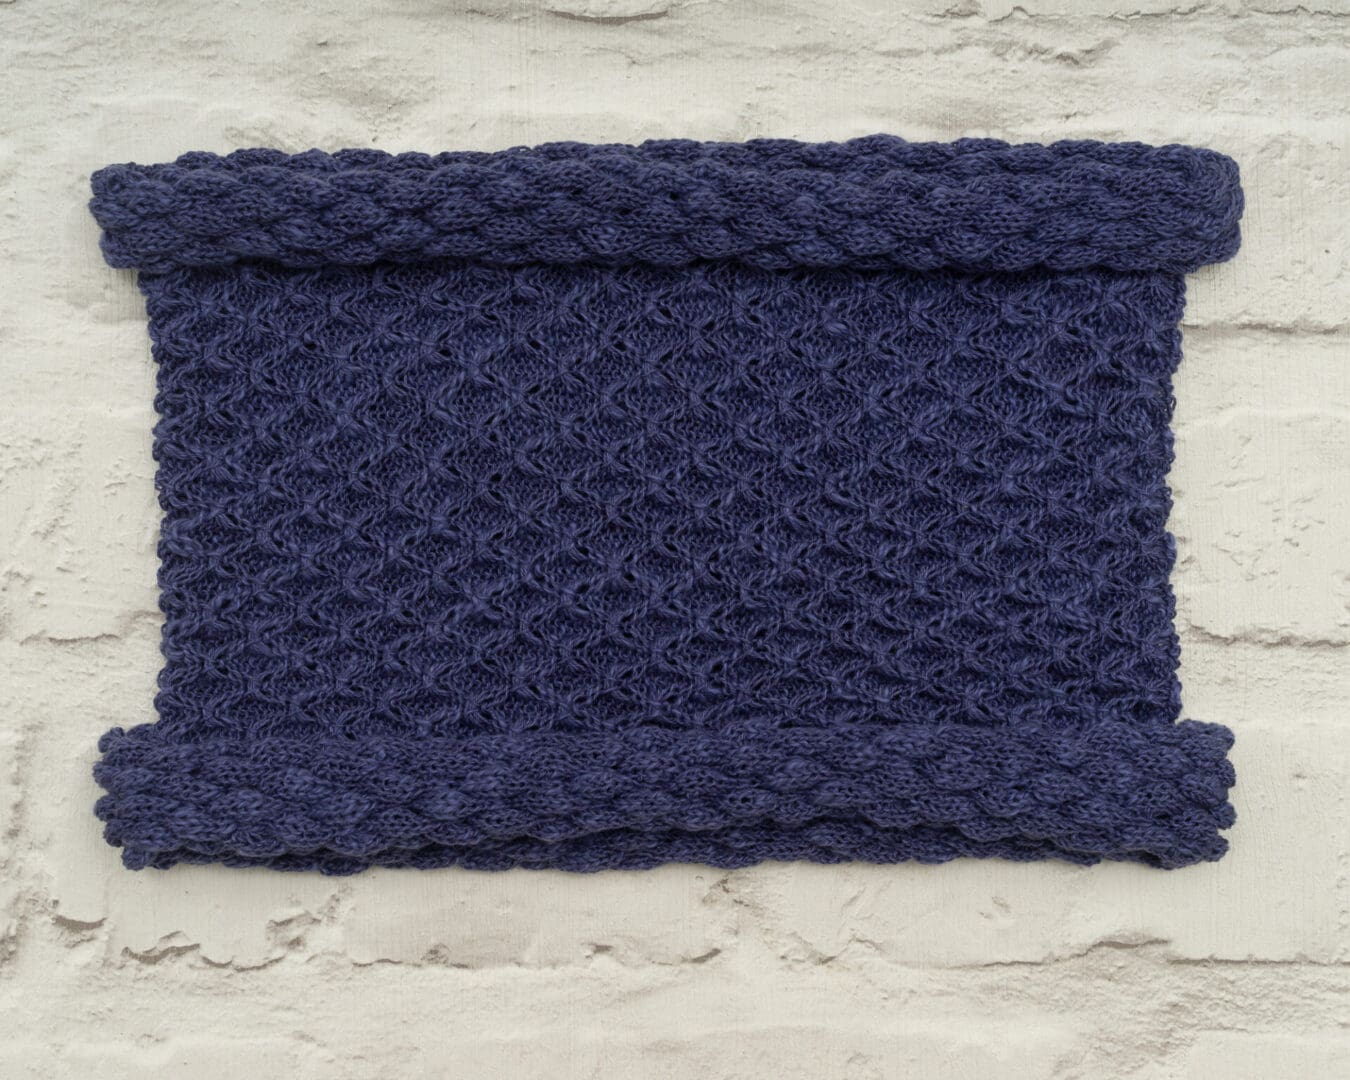 Handmade Denim Blue Knitted Patterned Cotton Cowl Fabric